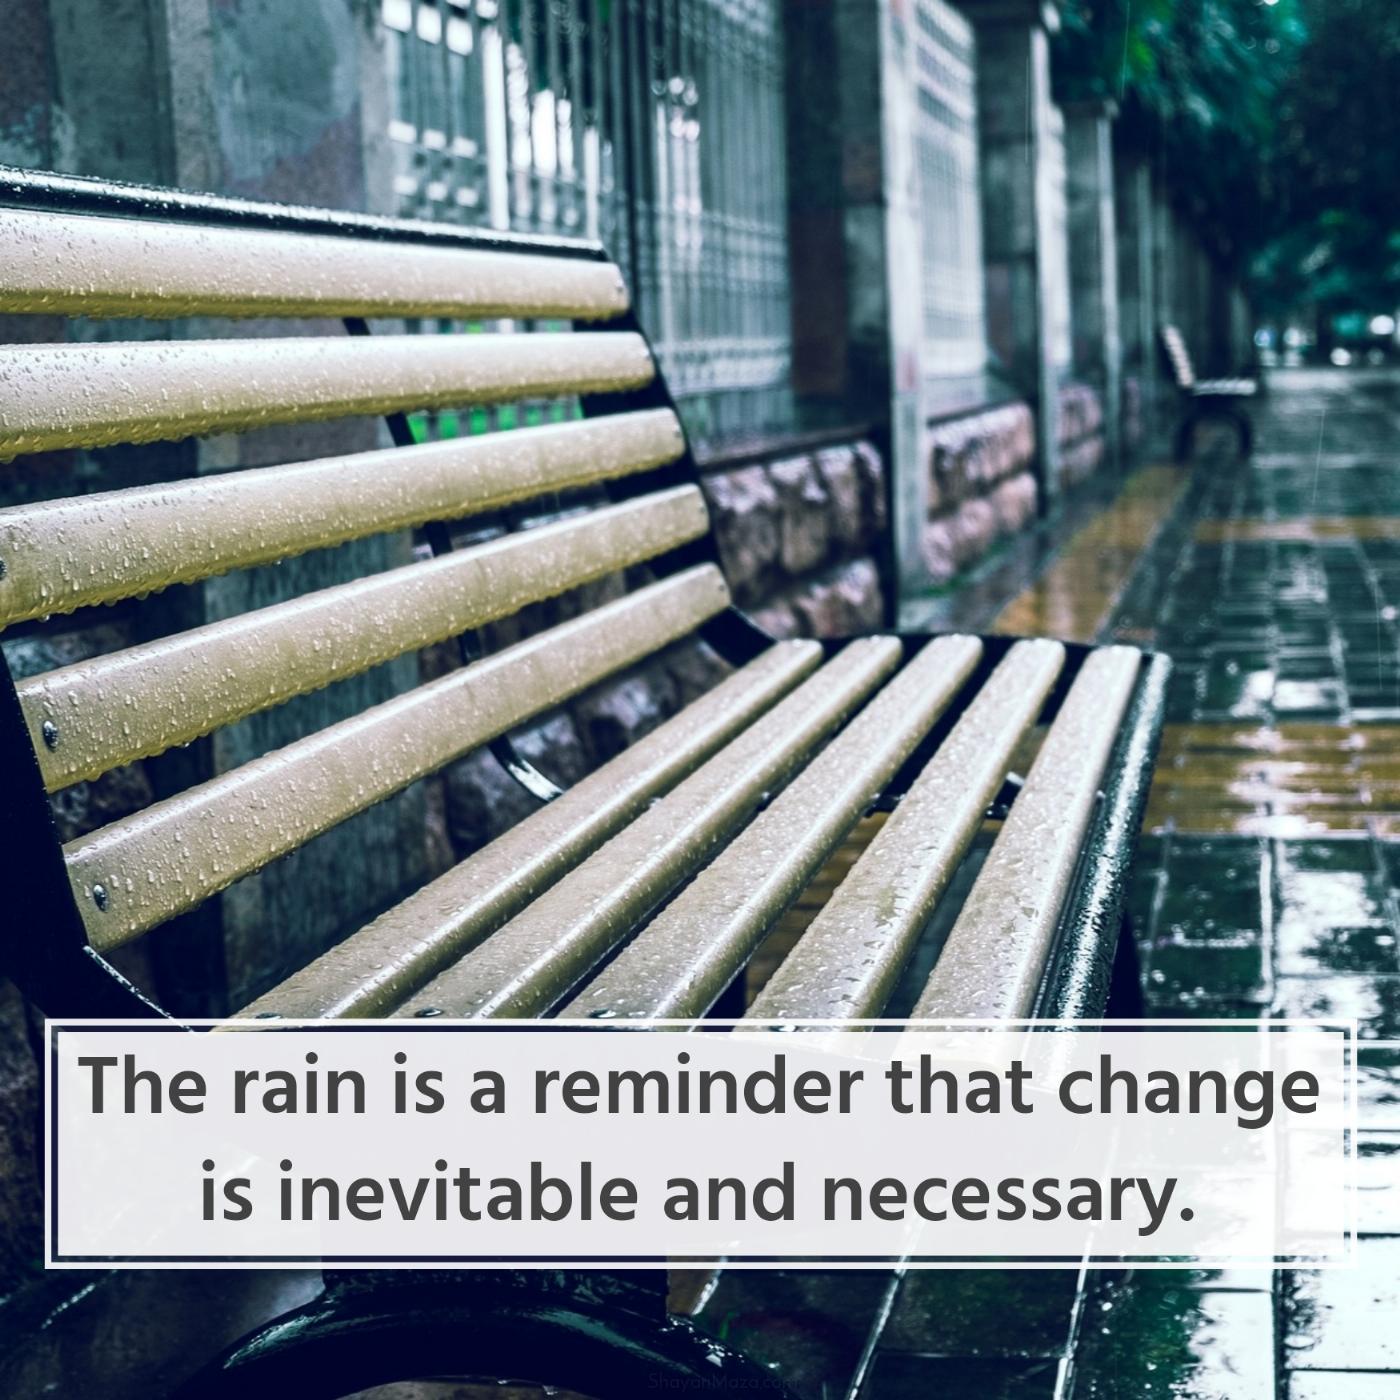 The rain is a reminder that change is inevitable and necessary